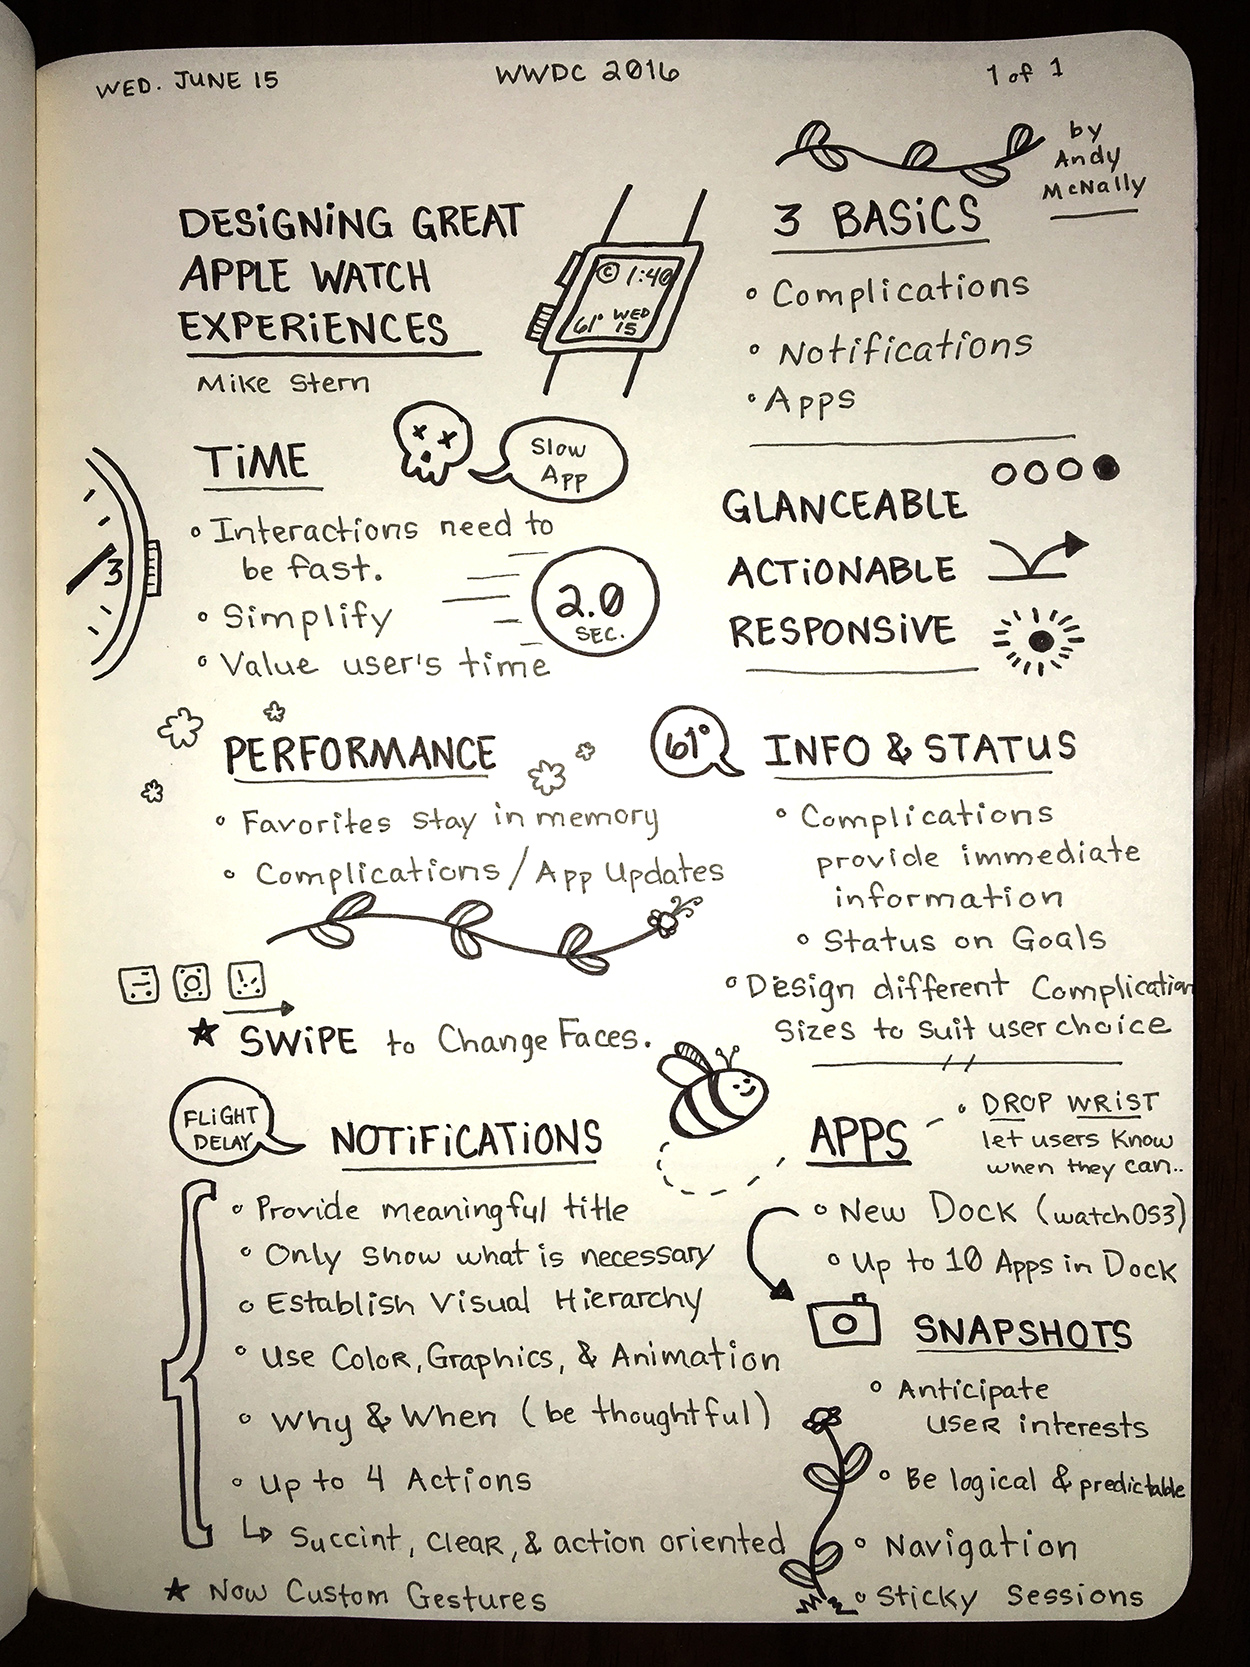 WWDC sketchnotes - Designing Great Apple Watch Experiences